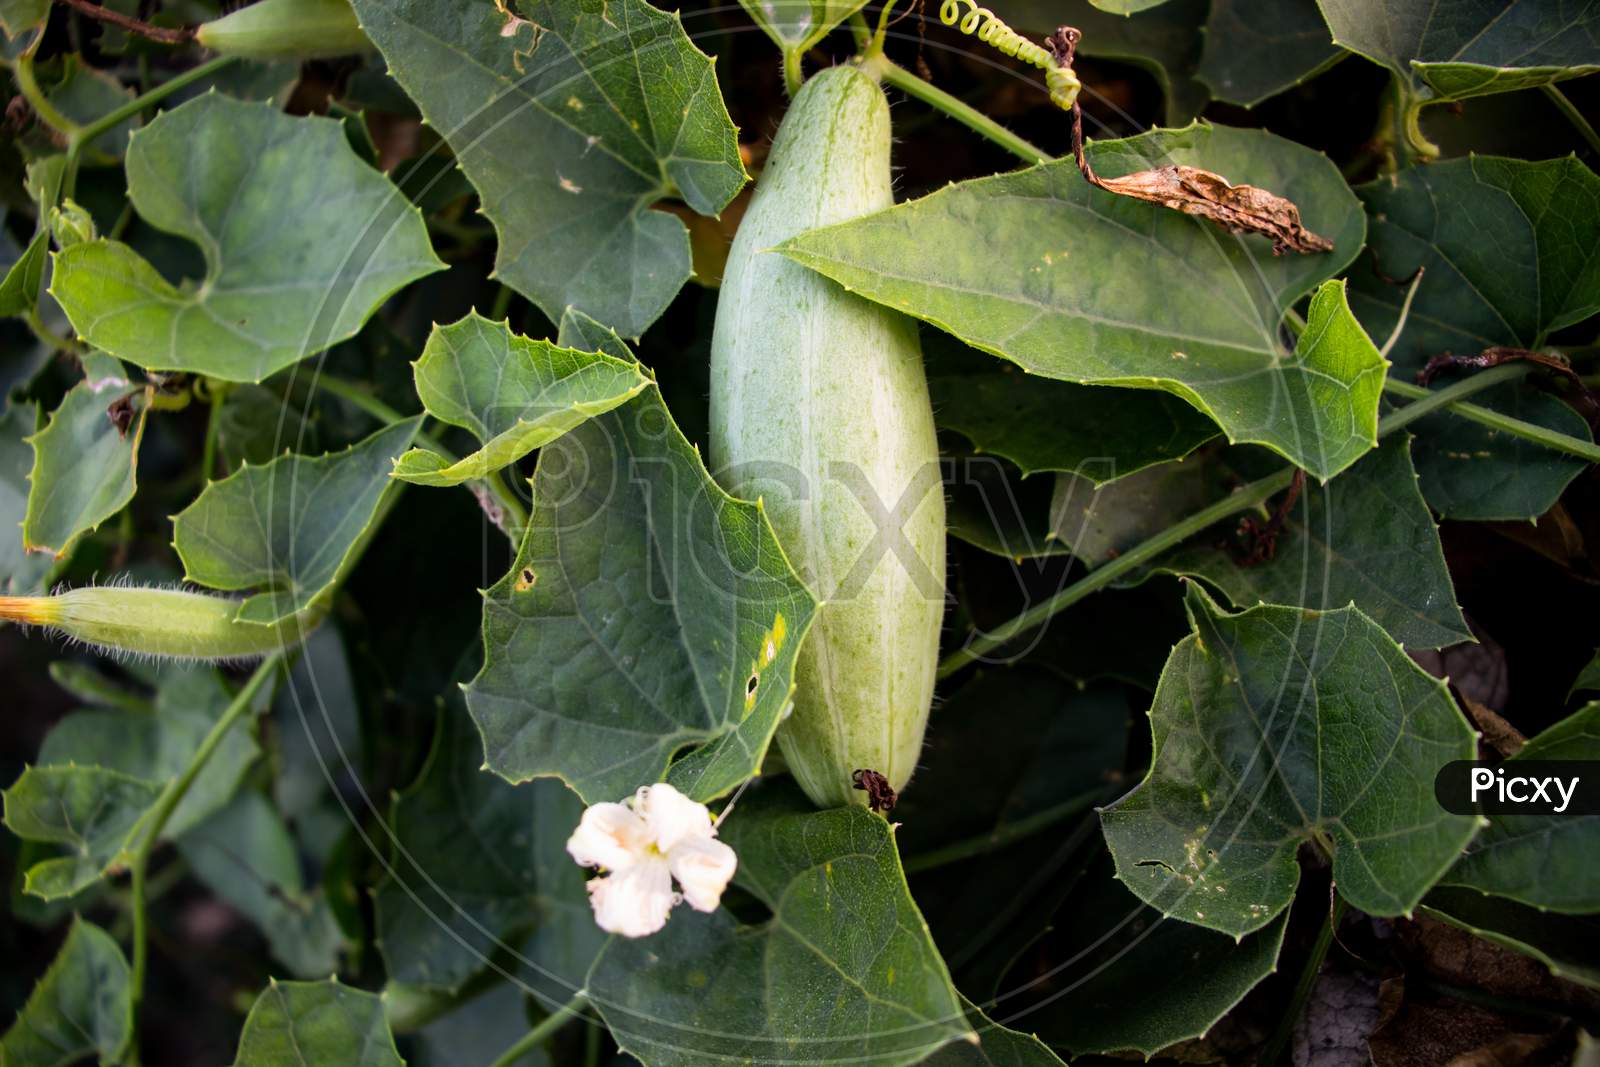 Pointed Gourd Vegetable And Flower Cultivation In The Village